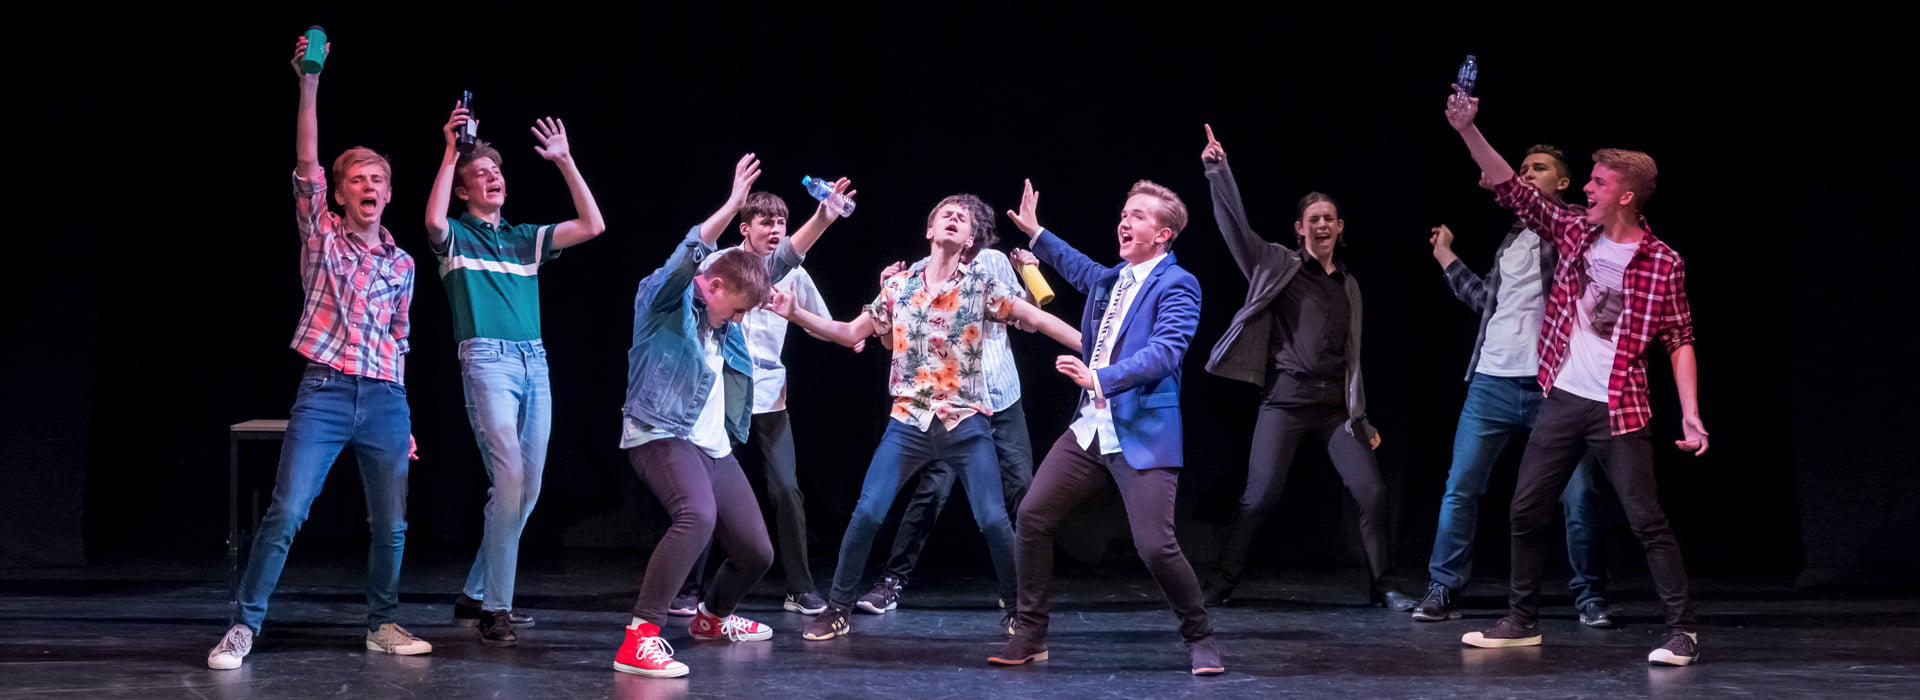 teen boys group sing and act musical theatre